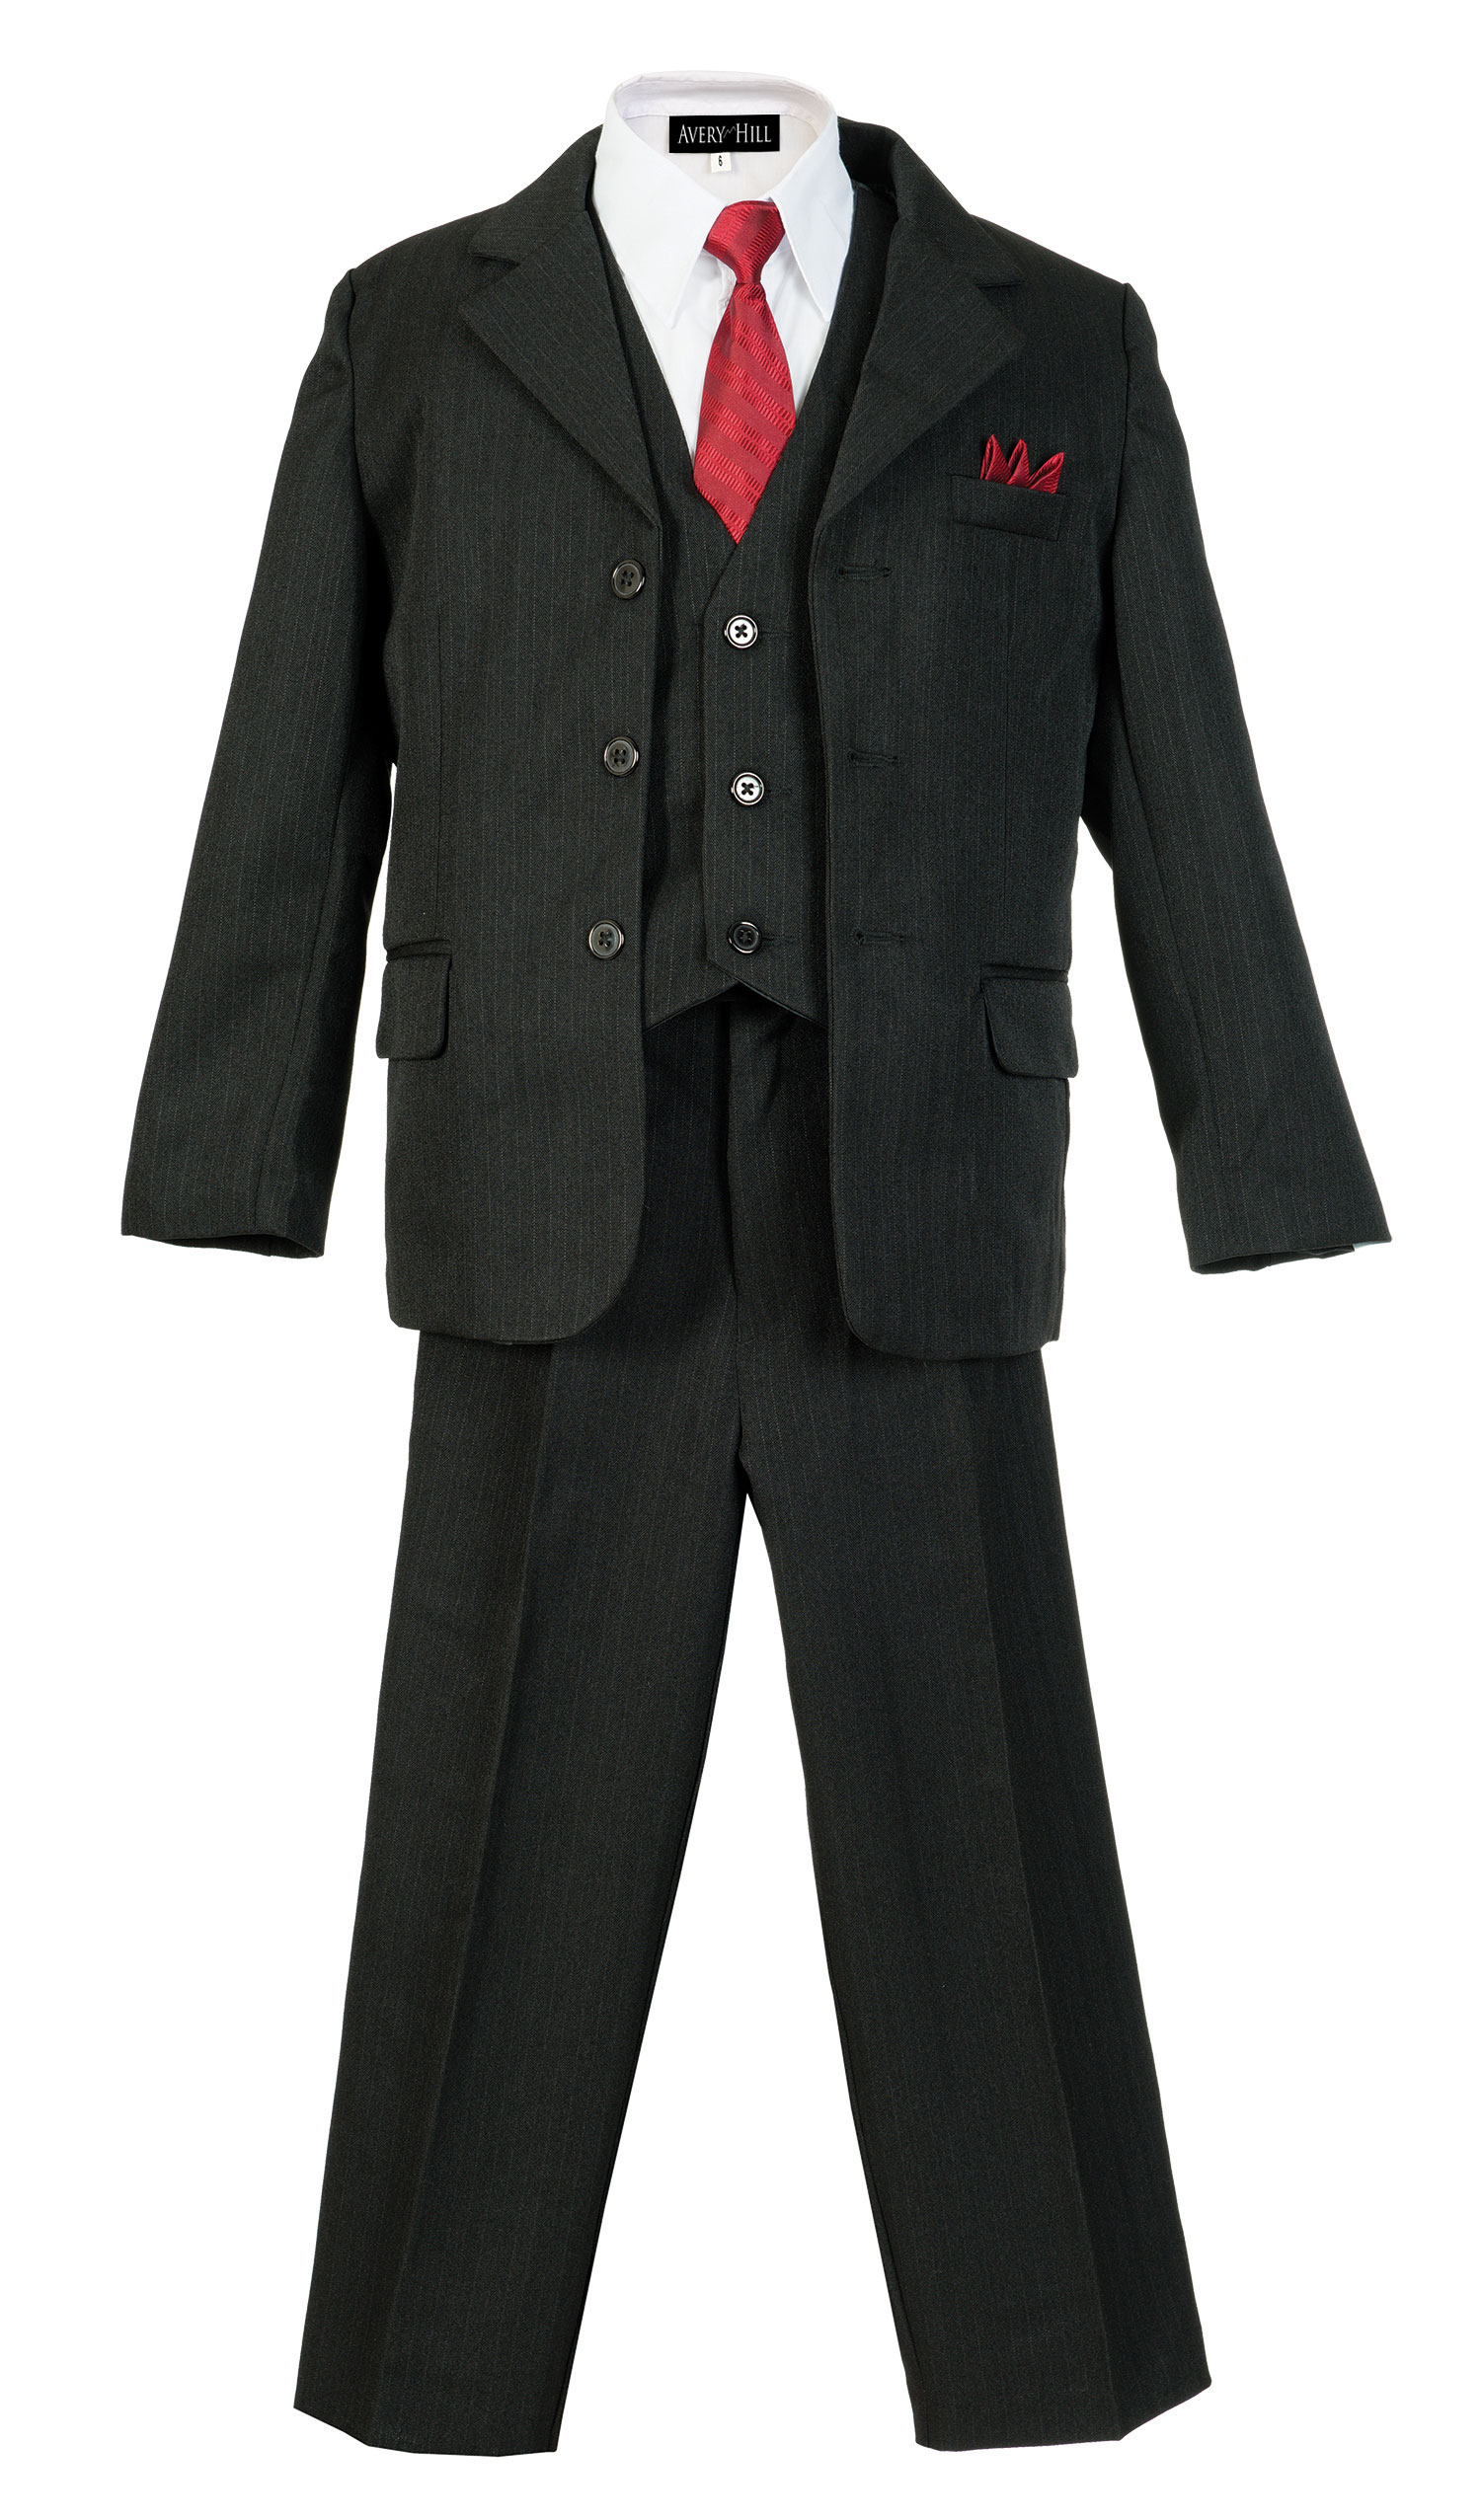 Boys Pinstripe Suit Set with Matching Tie BK 10